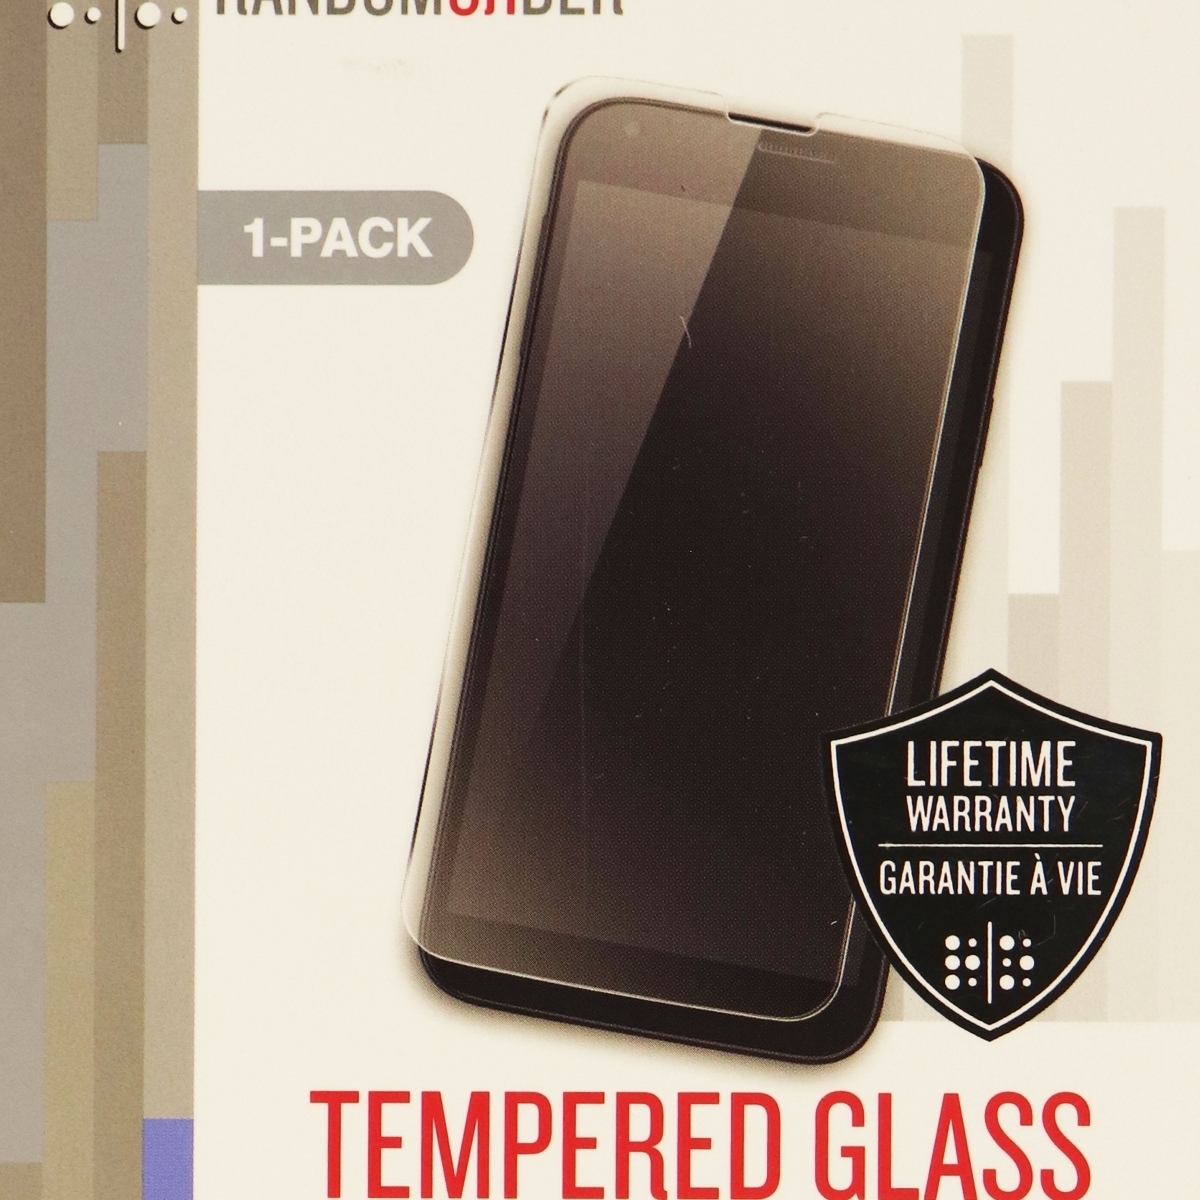 RandomOrder Tempered Glass Screen Protector For The LG K8 - Clear